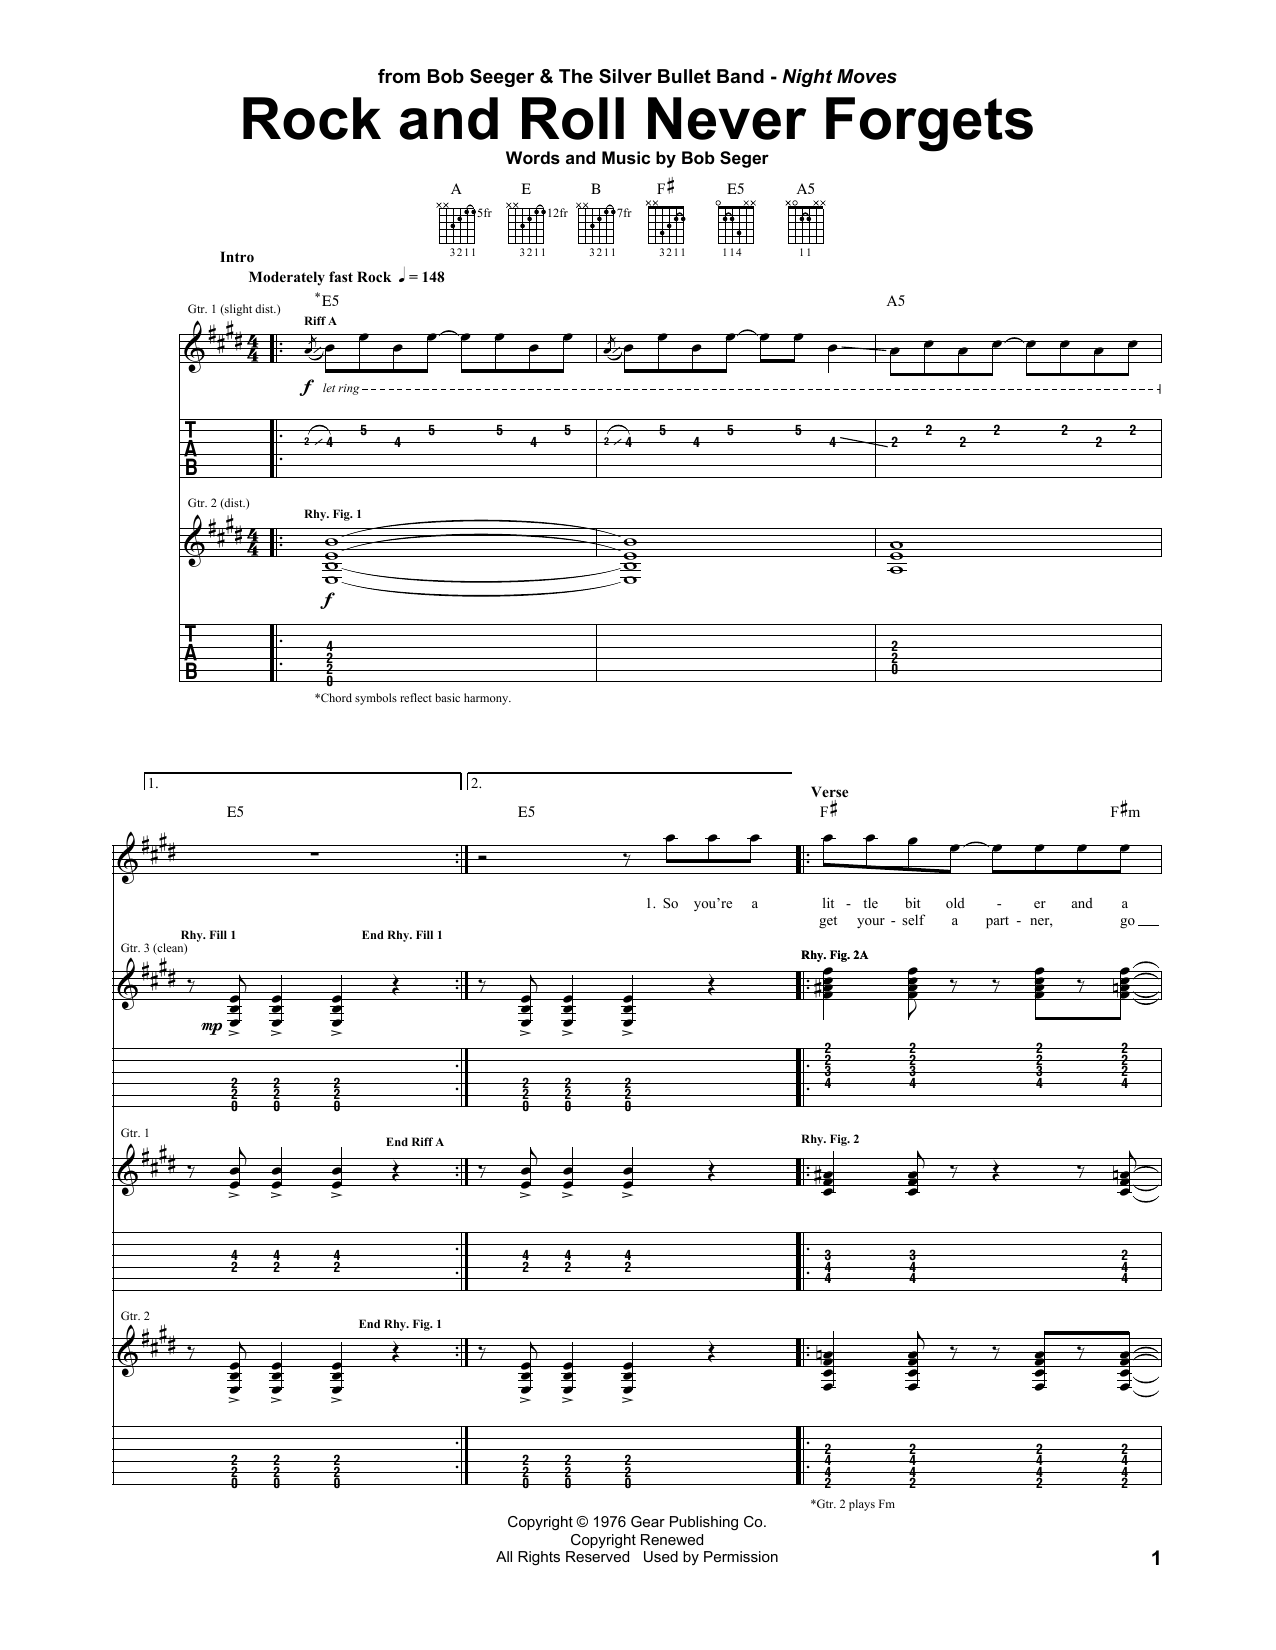 Bob Seger Rock And Roll Never Forgets sheet music notes and chords. Download Printable PDF.